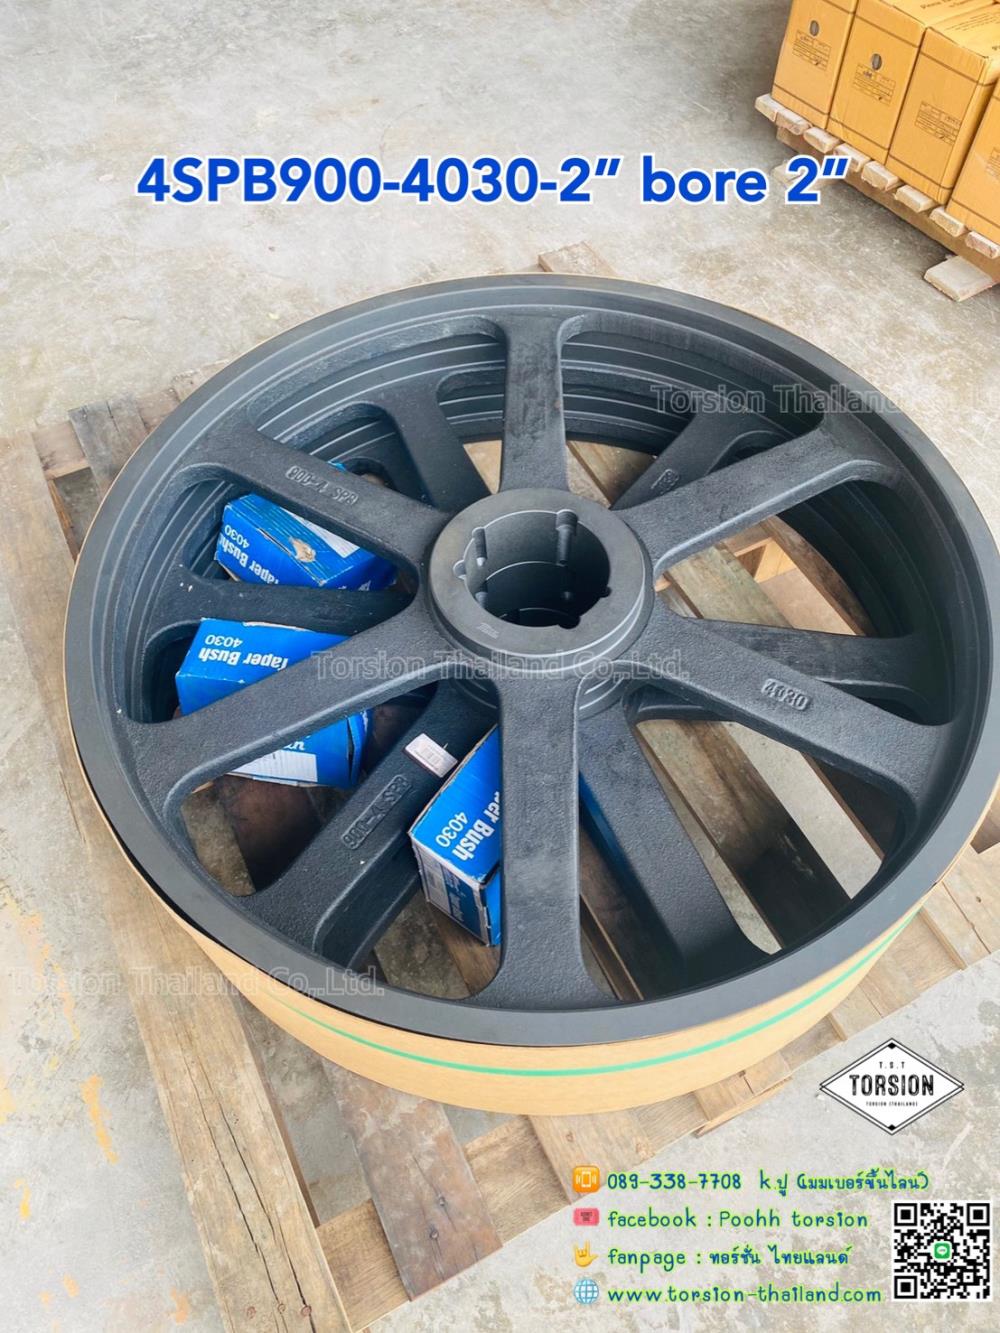 "Martin" Pulley + Taper bush 4SPB900-4030-2",Pulley , มู่เลย์ , taper pulley , pulley taper bush , Martin , HUMMER , TORSION,MARTIN,Electrical and Power Generation/Power Transmission